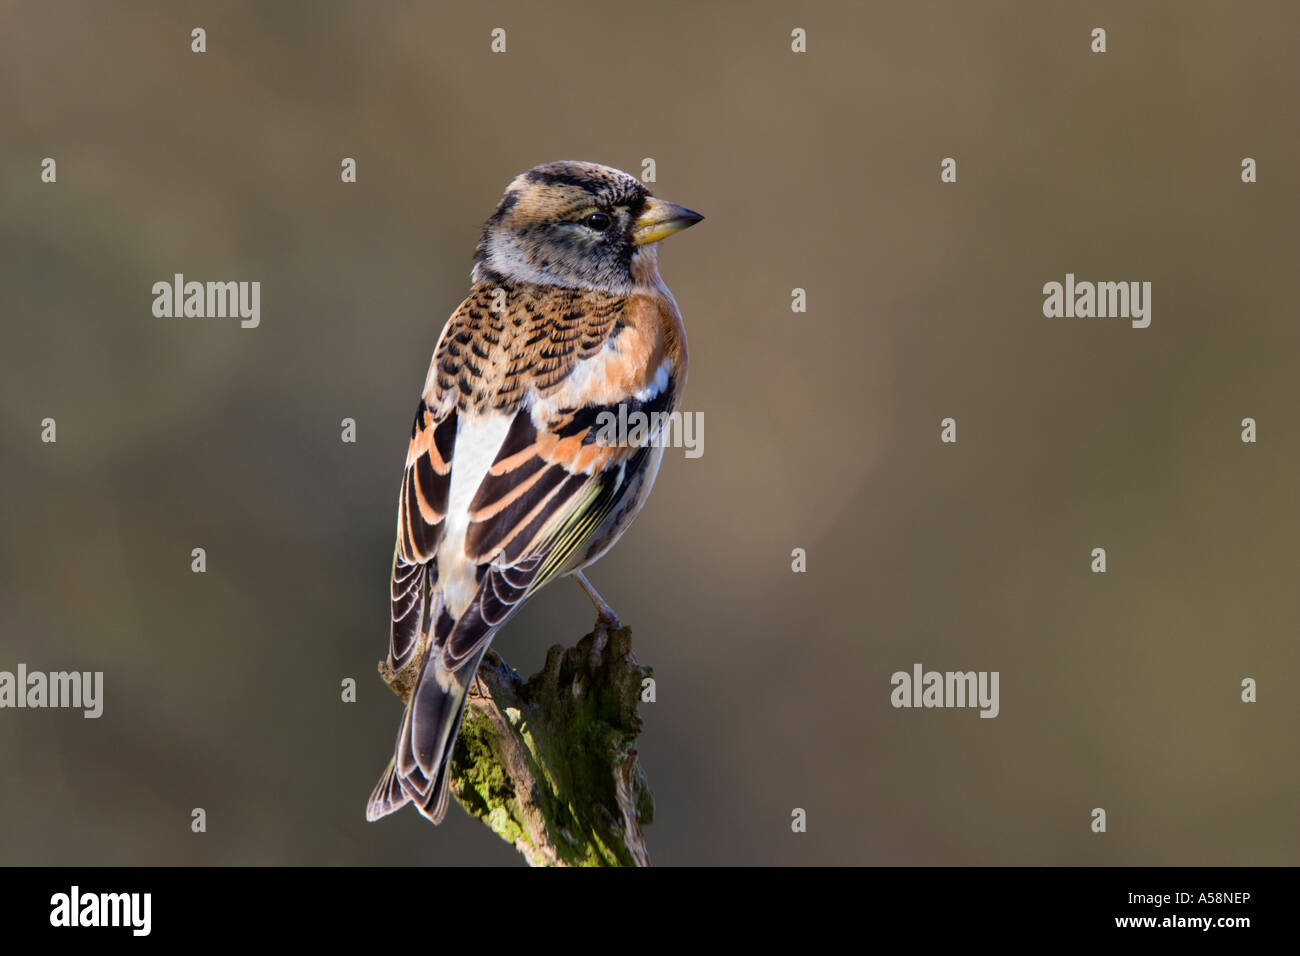 Brambling Fringilla montifringilla perched on stump showing white rump looking alert with nice out of focus background potton Stock Photo